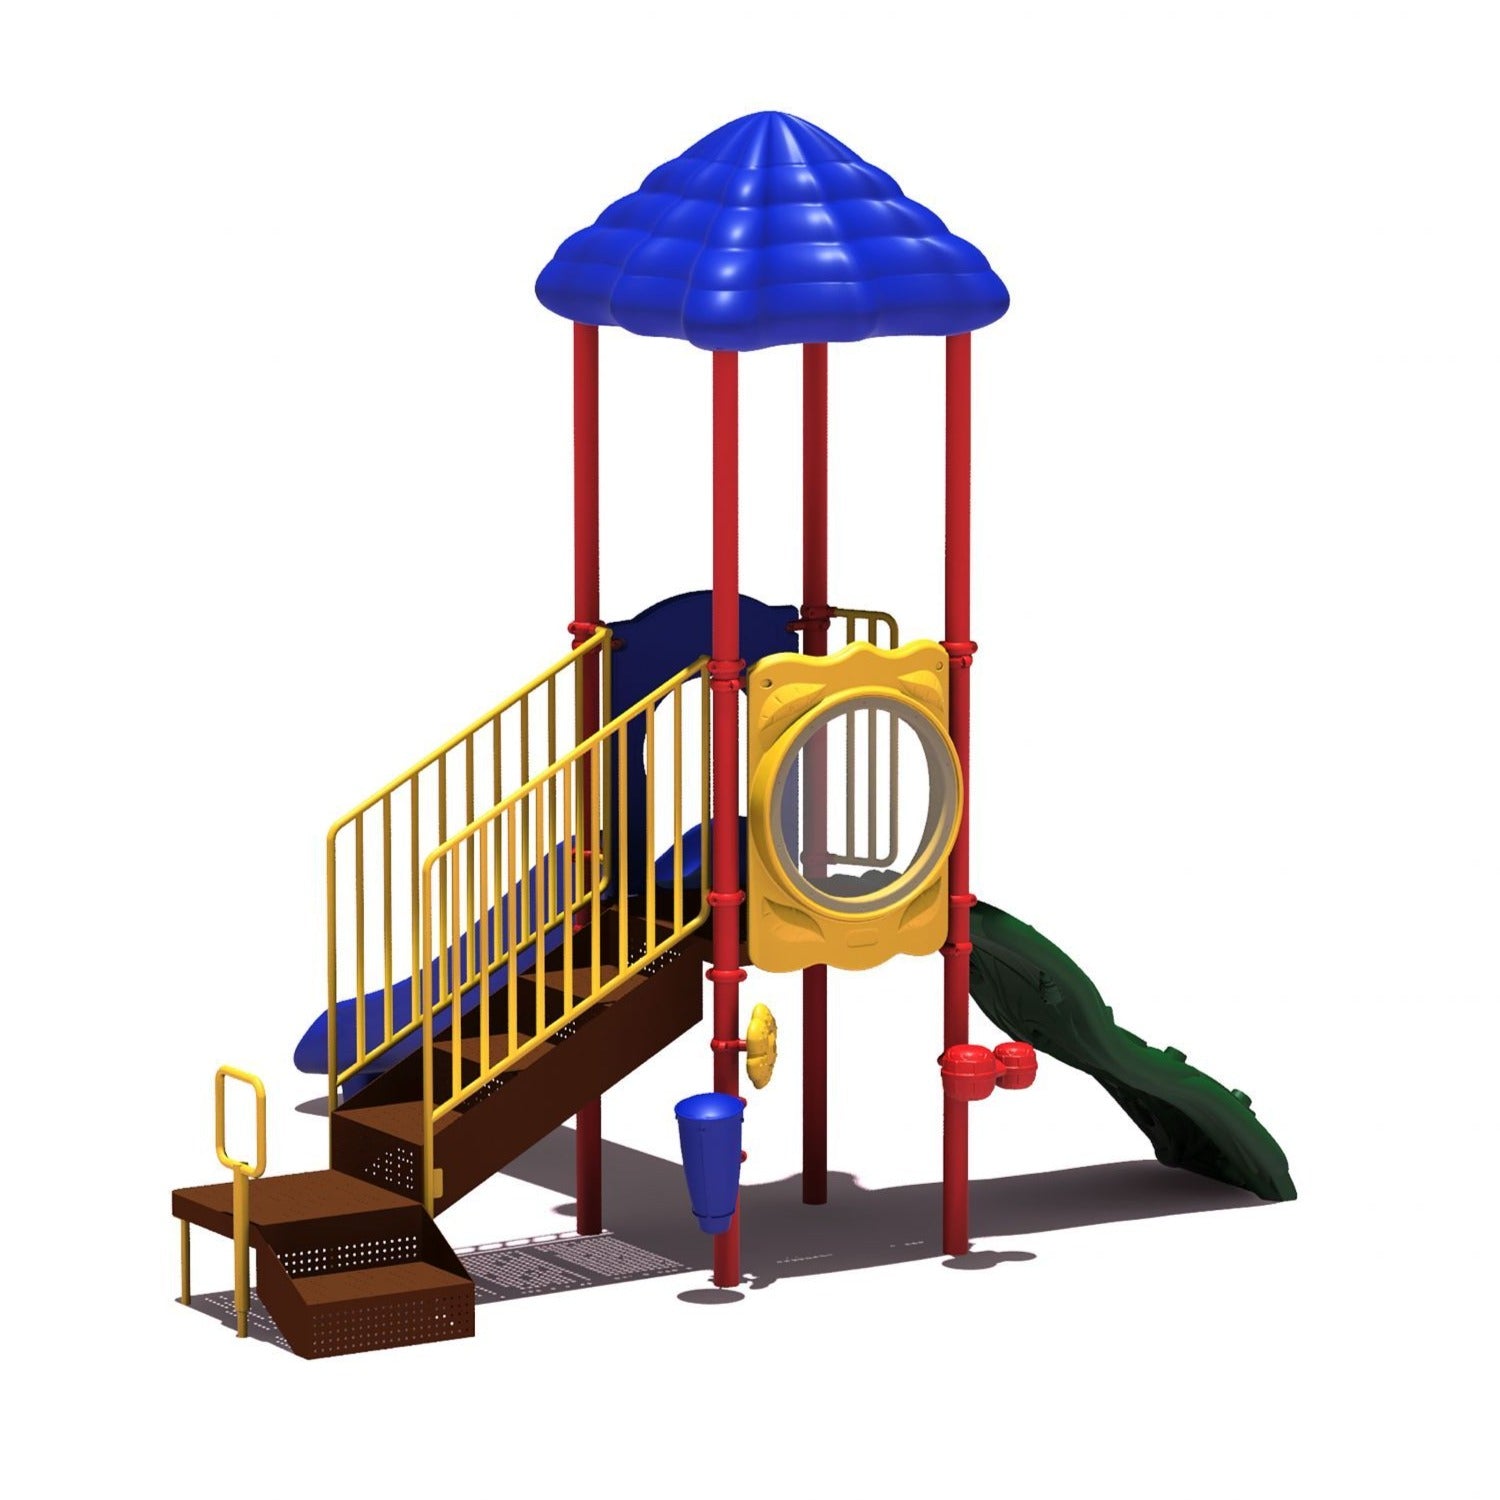 South Fork Play System | WillyGoat Playground & Park Equipment